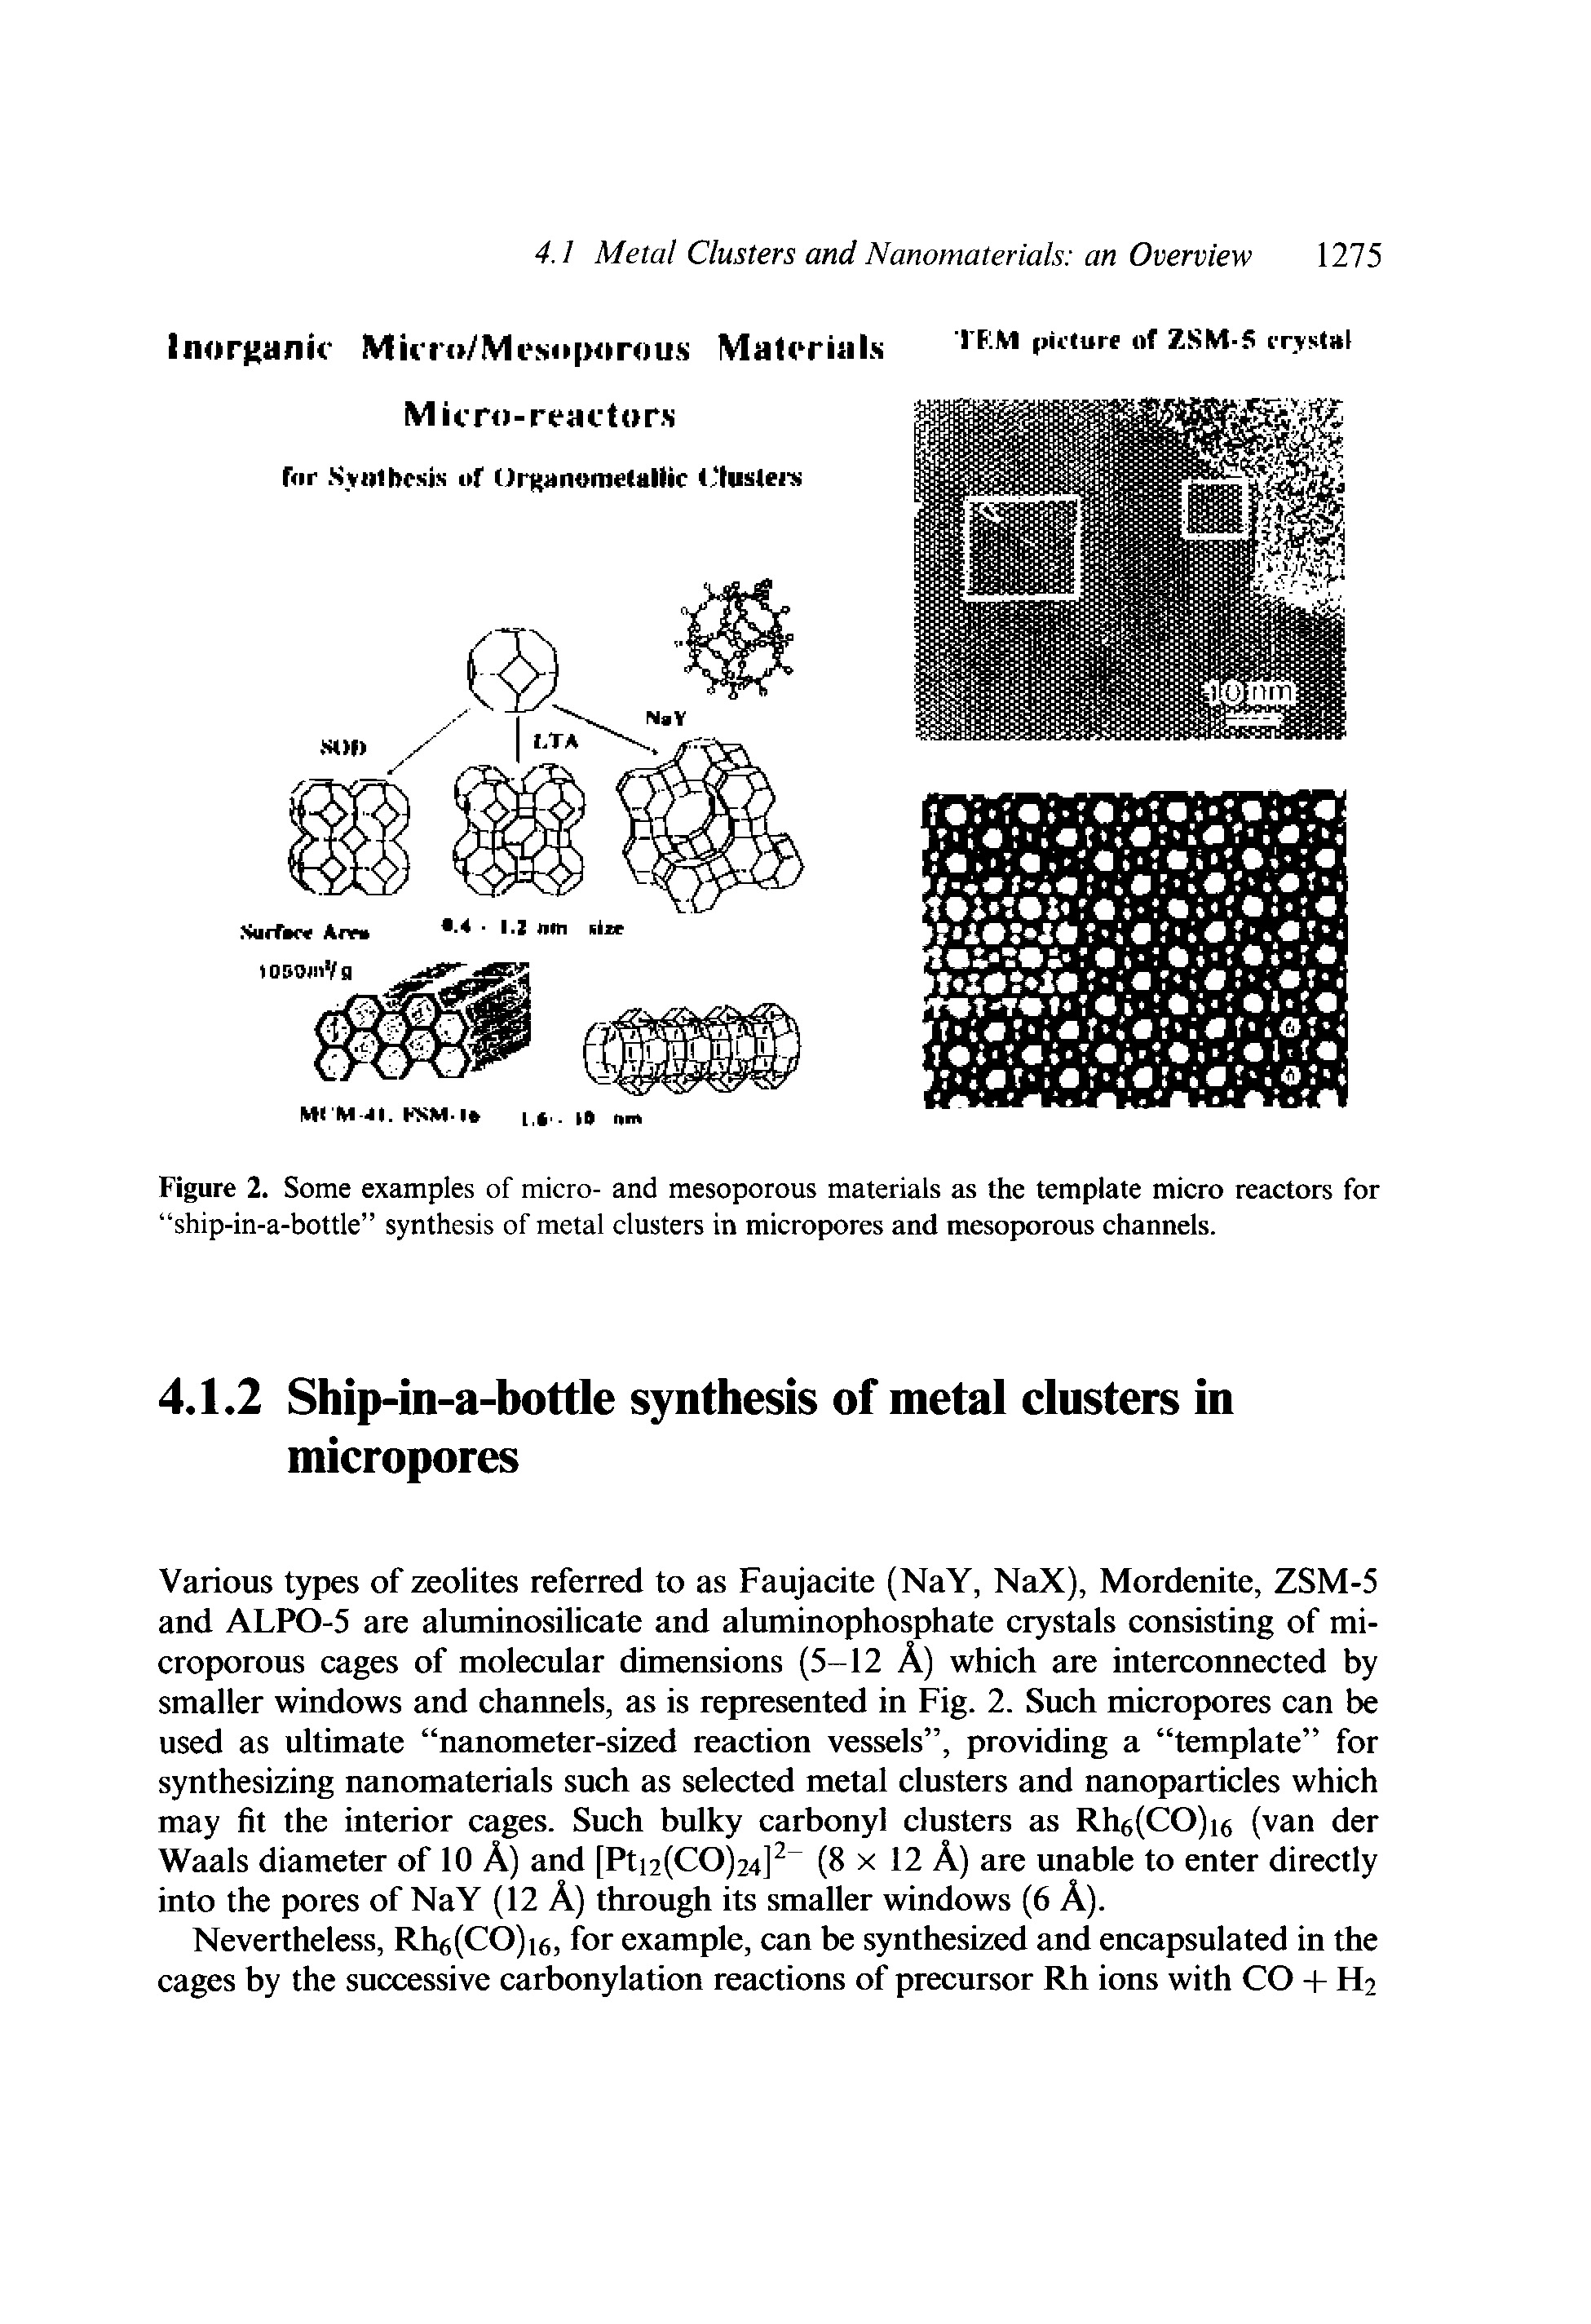 Figure 2. Some examples of micro- and mesoporous materials as the template micro reactors for ship-in-a-bottle synthesis of metal clusters in micropores and mesoporous channels.